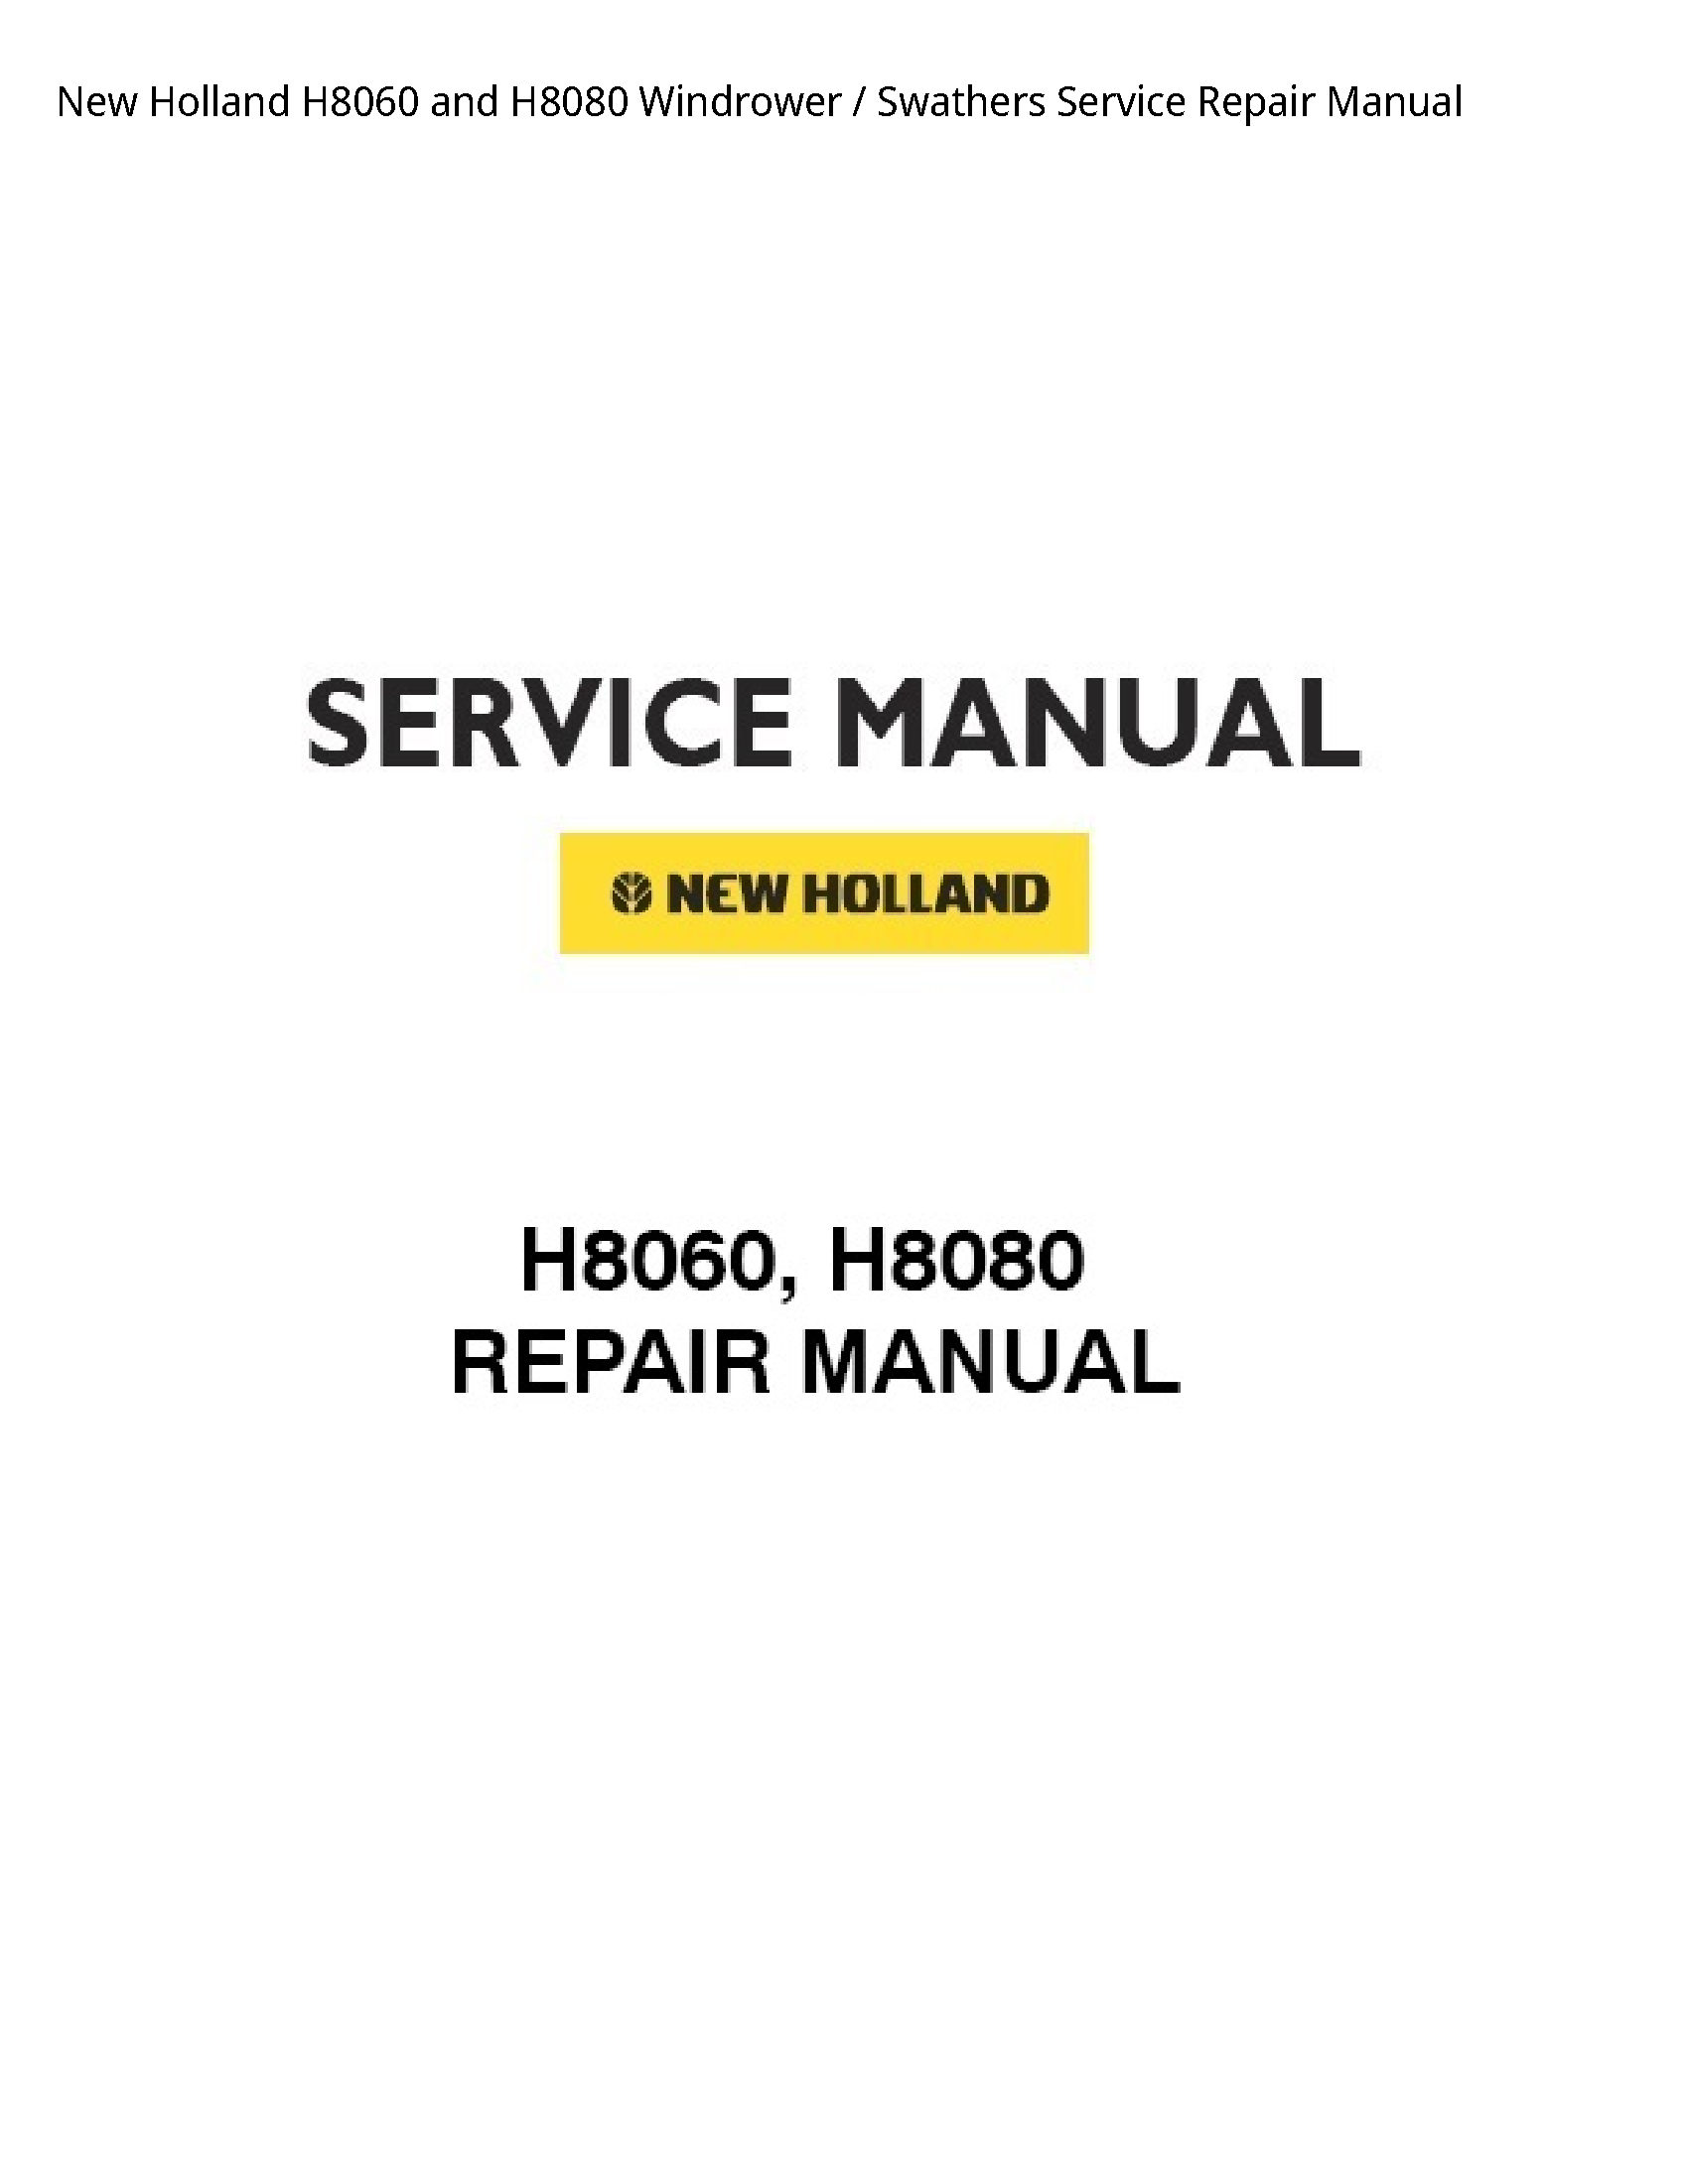 New Holland H8060  Windrower Swathers manual